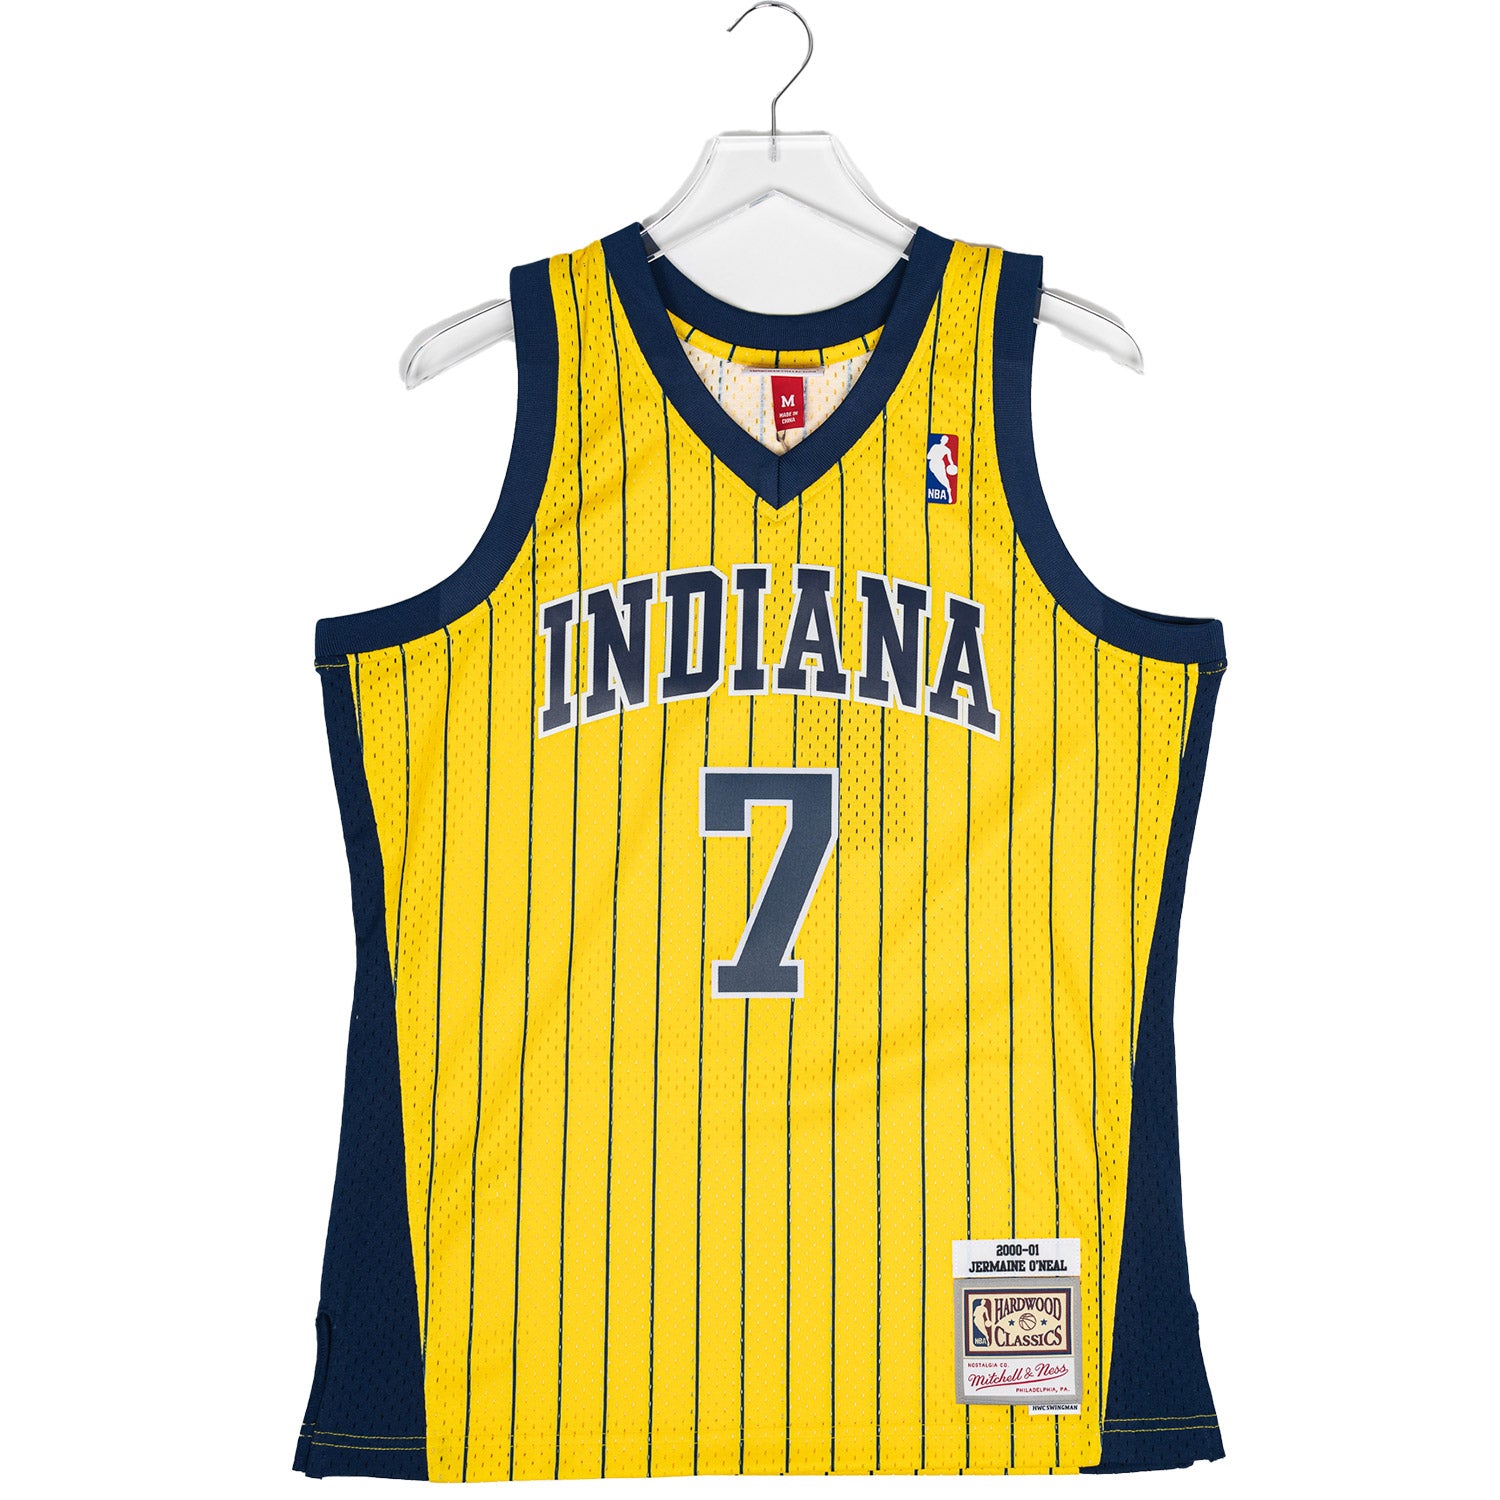 Buy NBA Youth Apparel Online, Mitchell & Ness